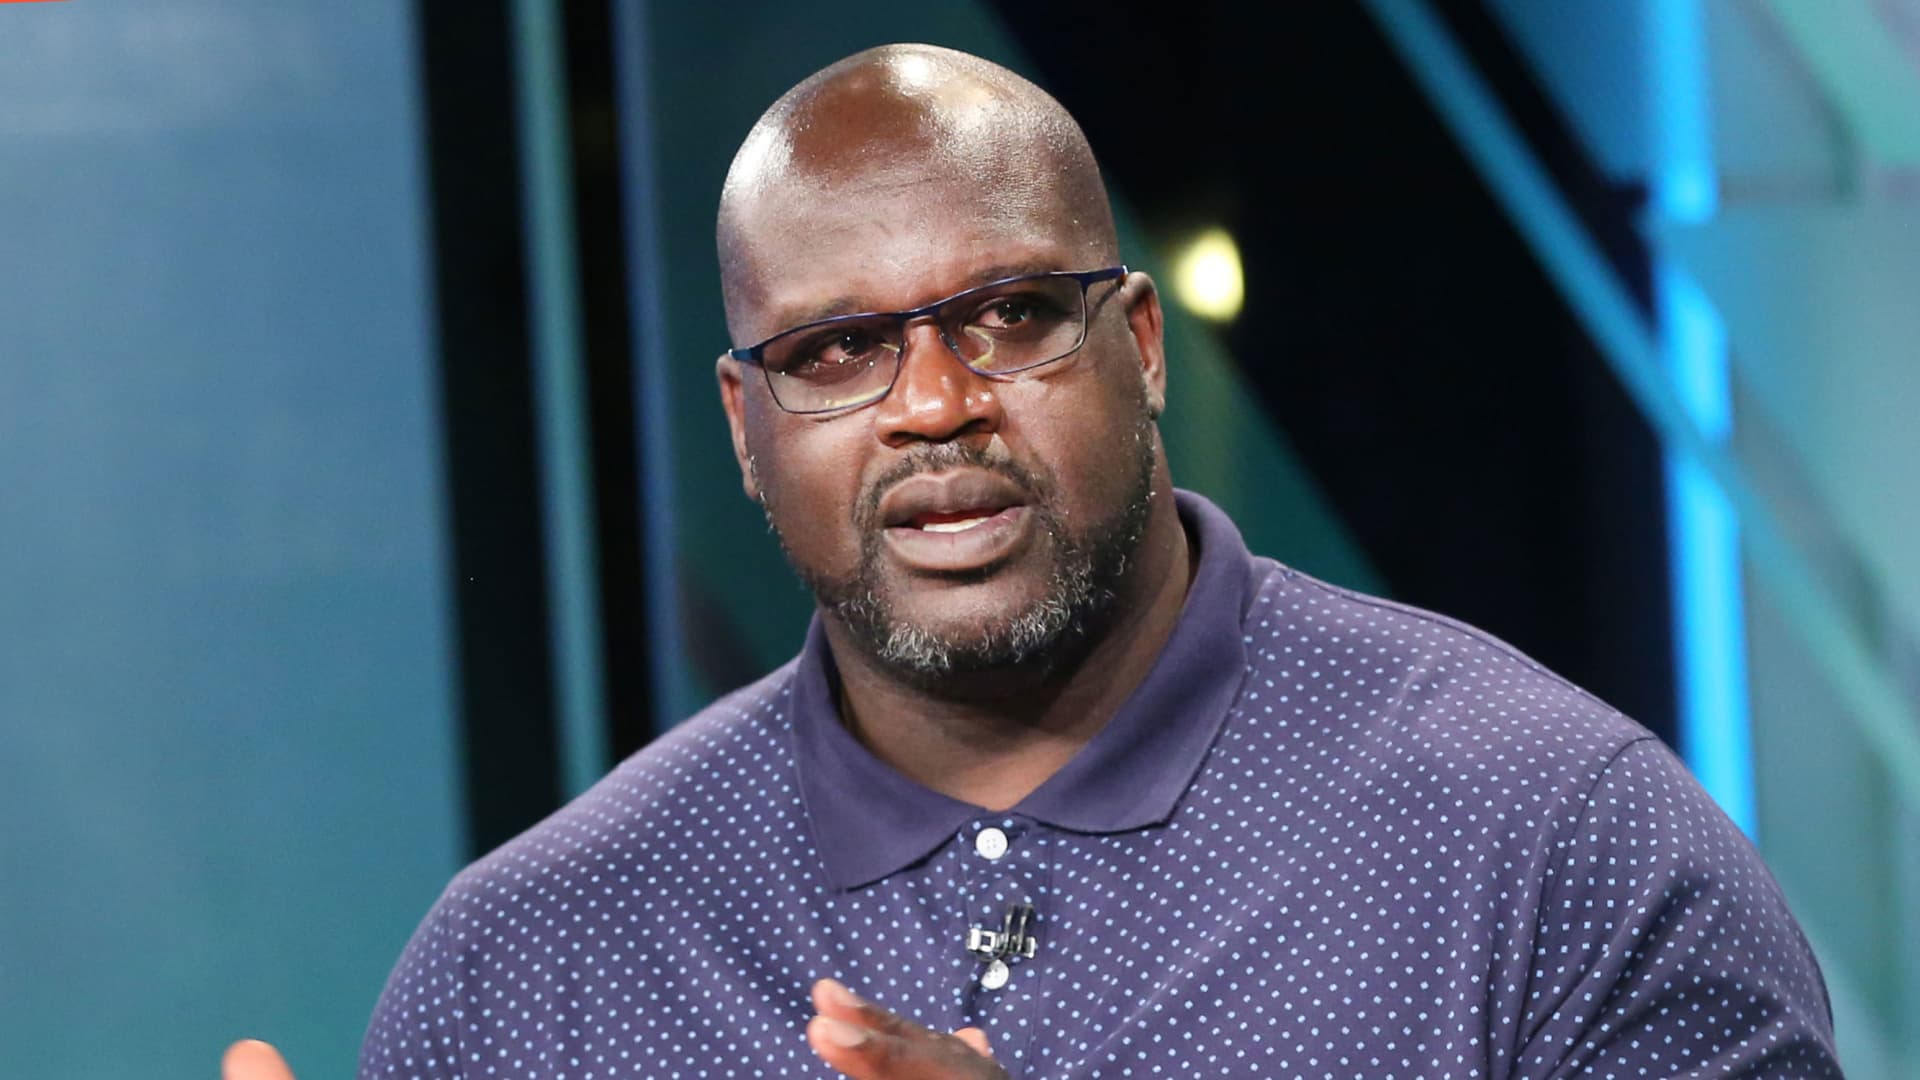 Shaquille O’Neal says this advice from Jeff Bezos got him to invest in a $29 million education startup backed by Sam Altman